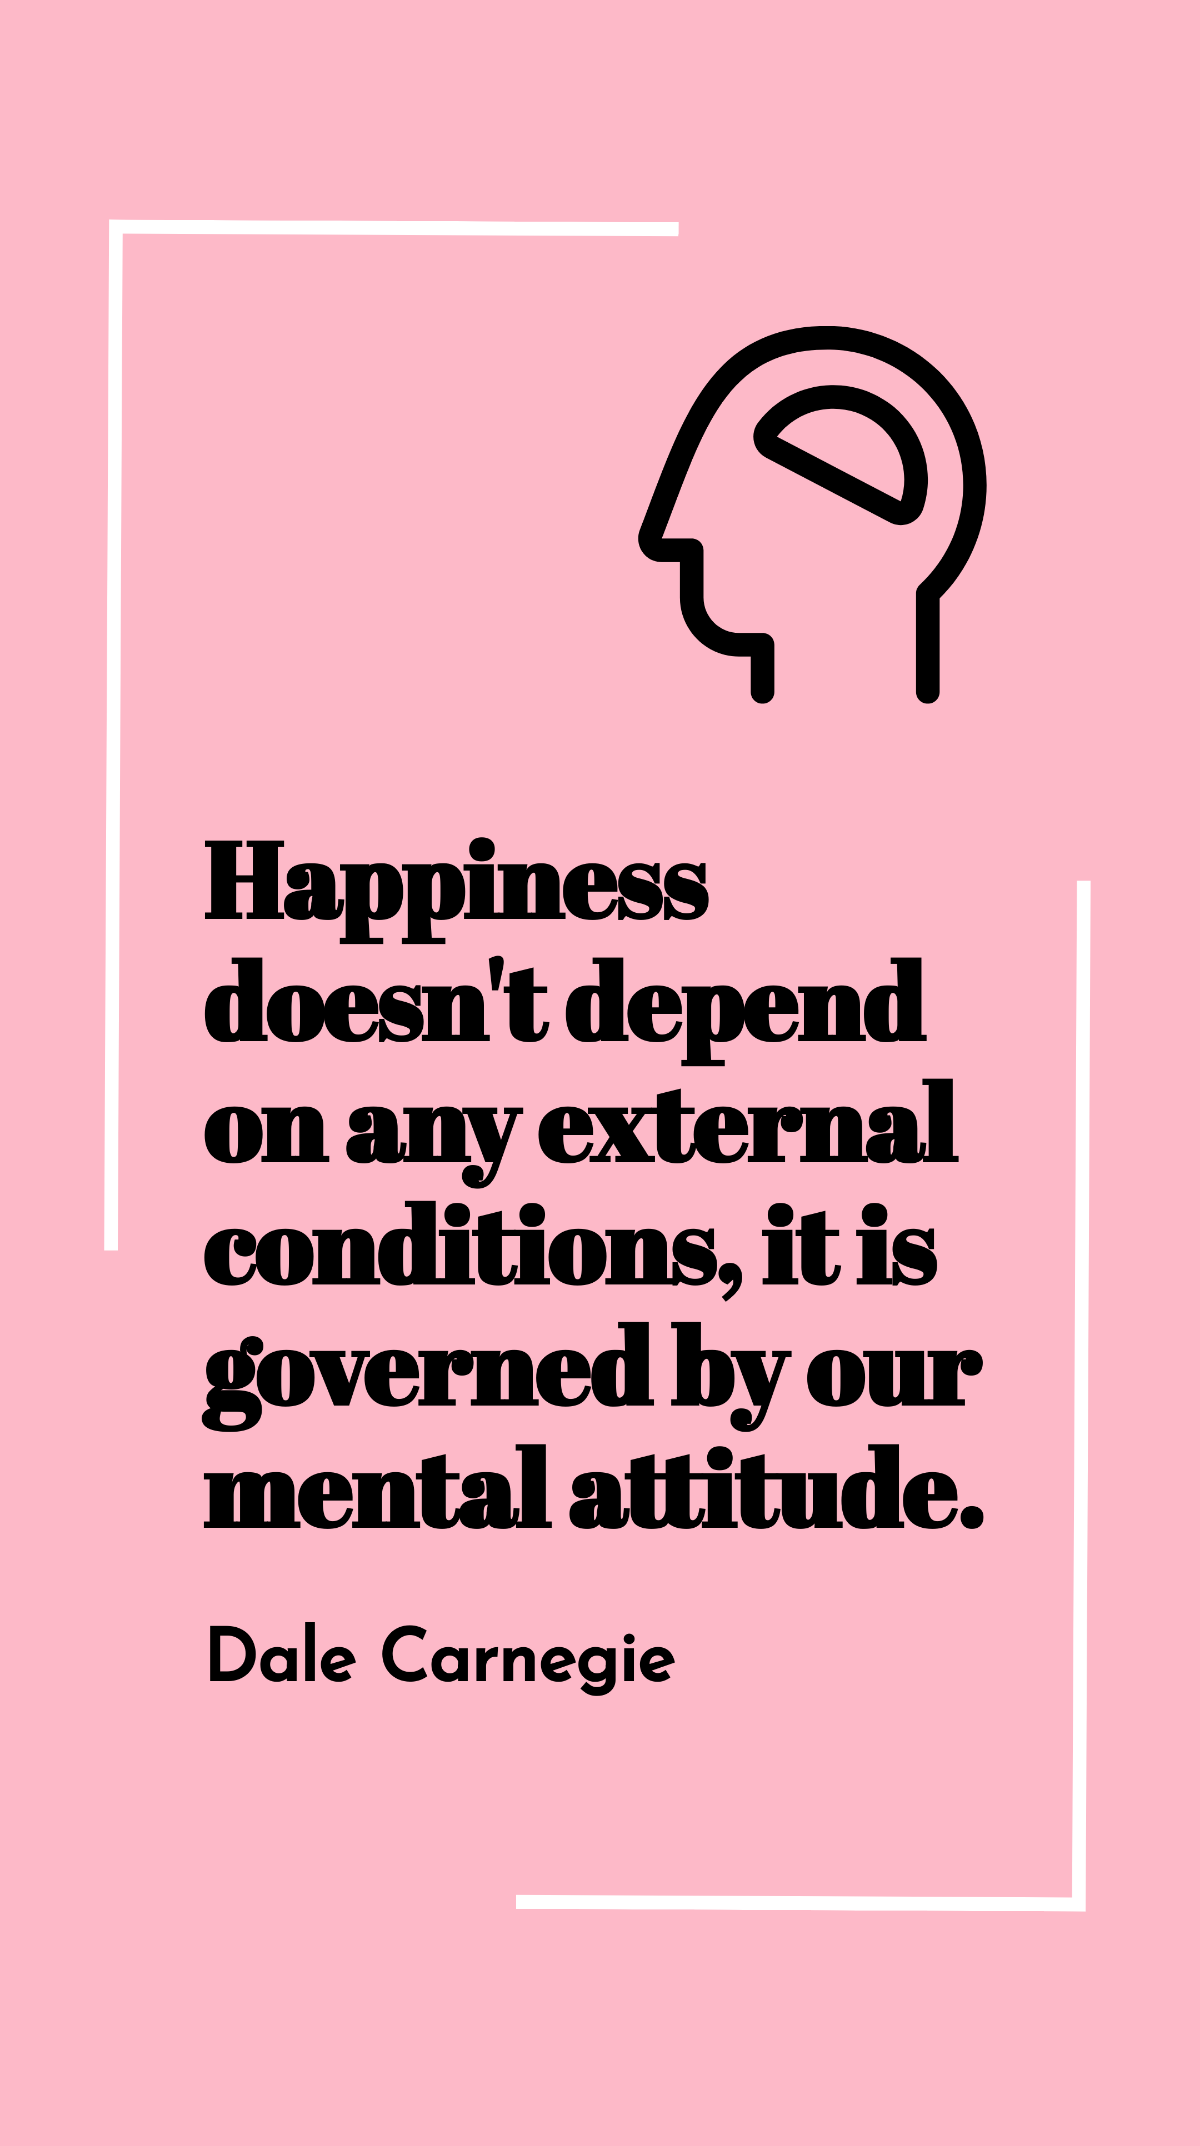 Dale Carnegie - Happiness doesn't depend on any external conditions, it is governed by our mental attitude. Template